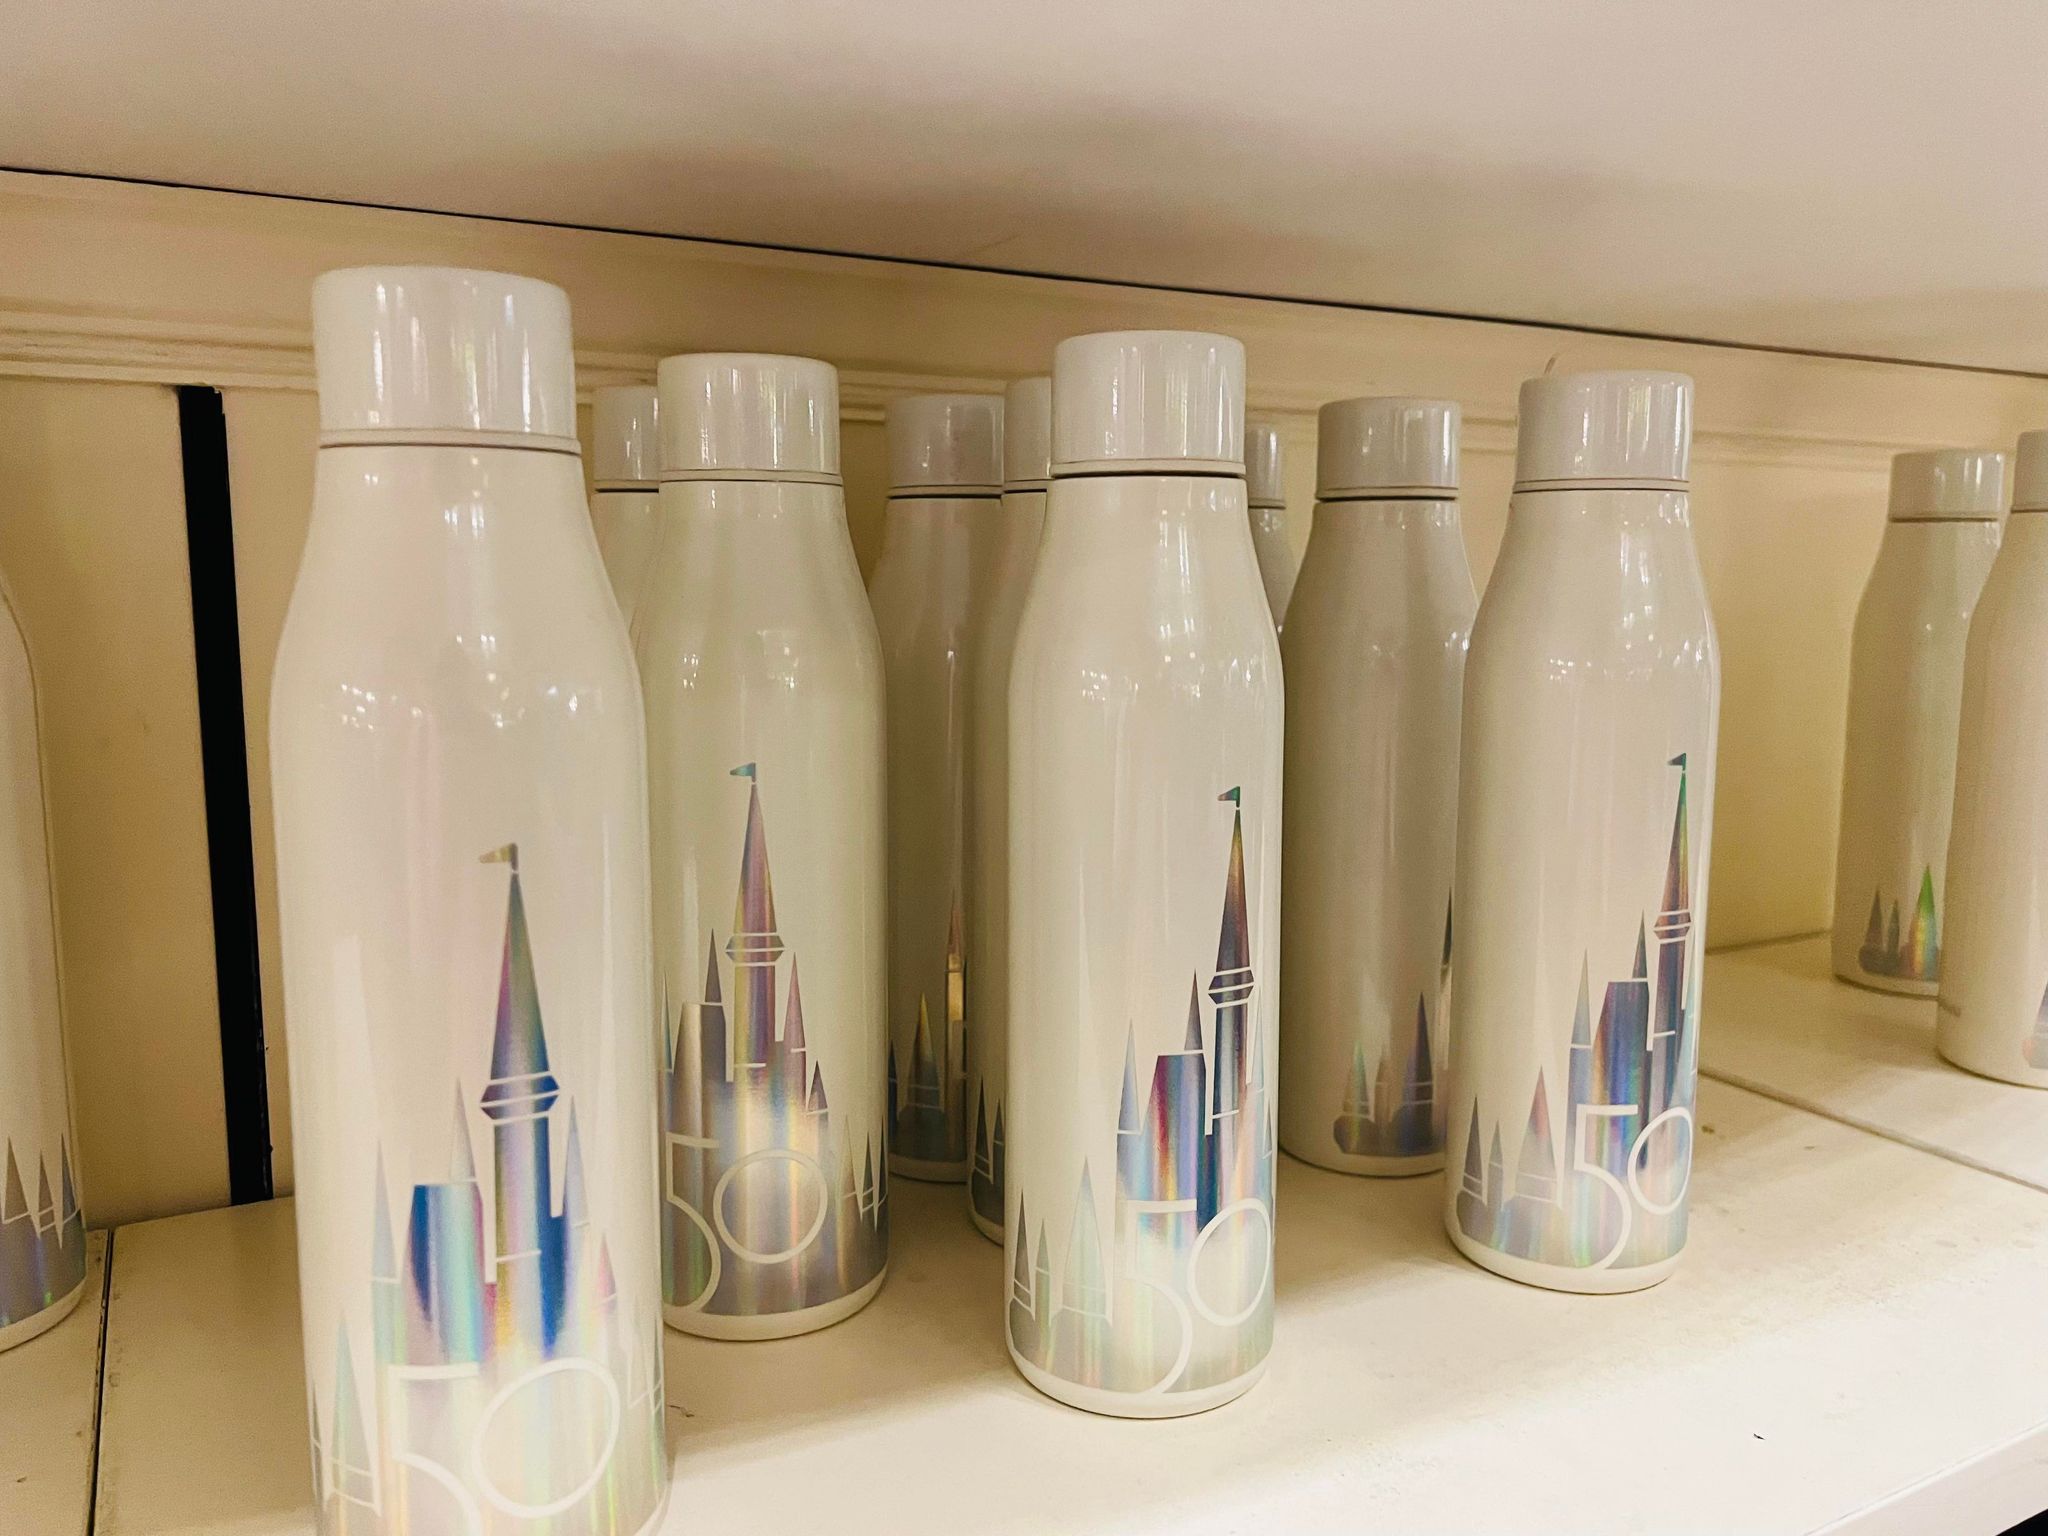 CORKCICLE Is Now the Official Premium Drinkware of Walt Disney